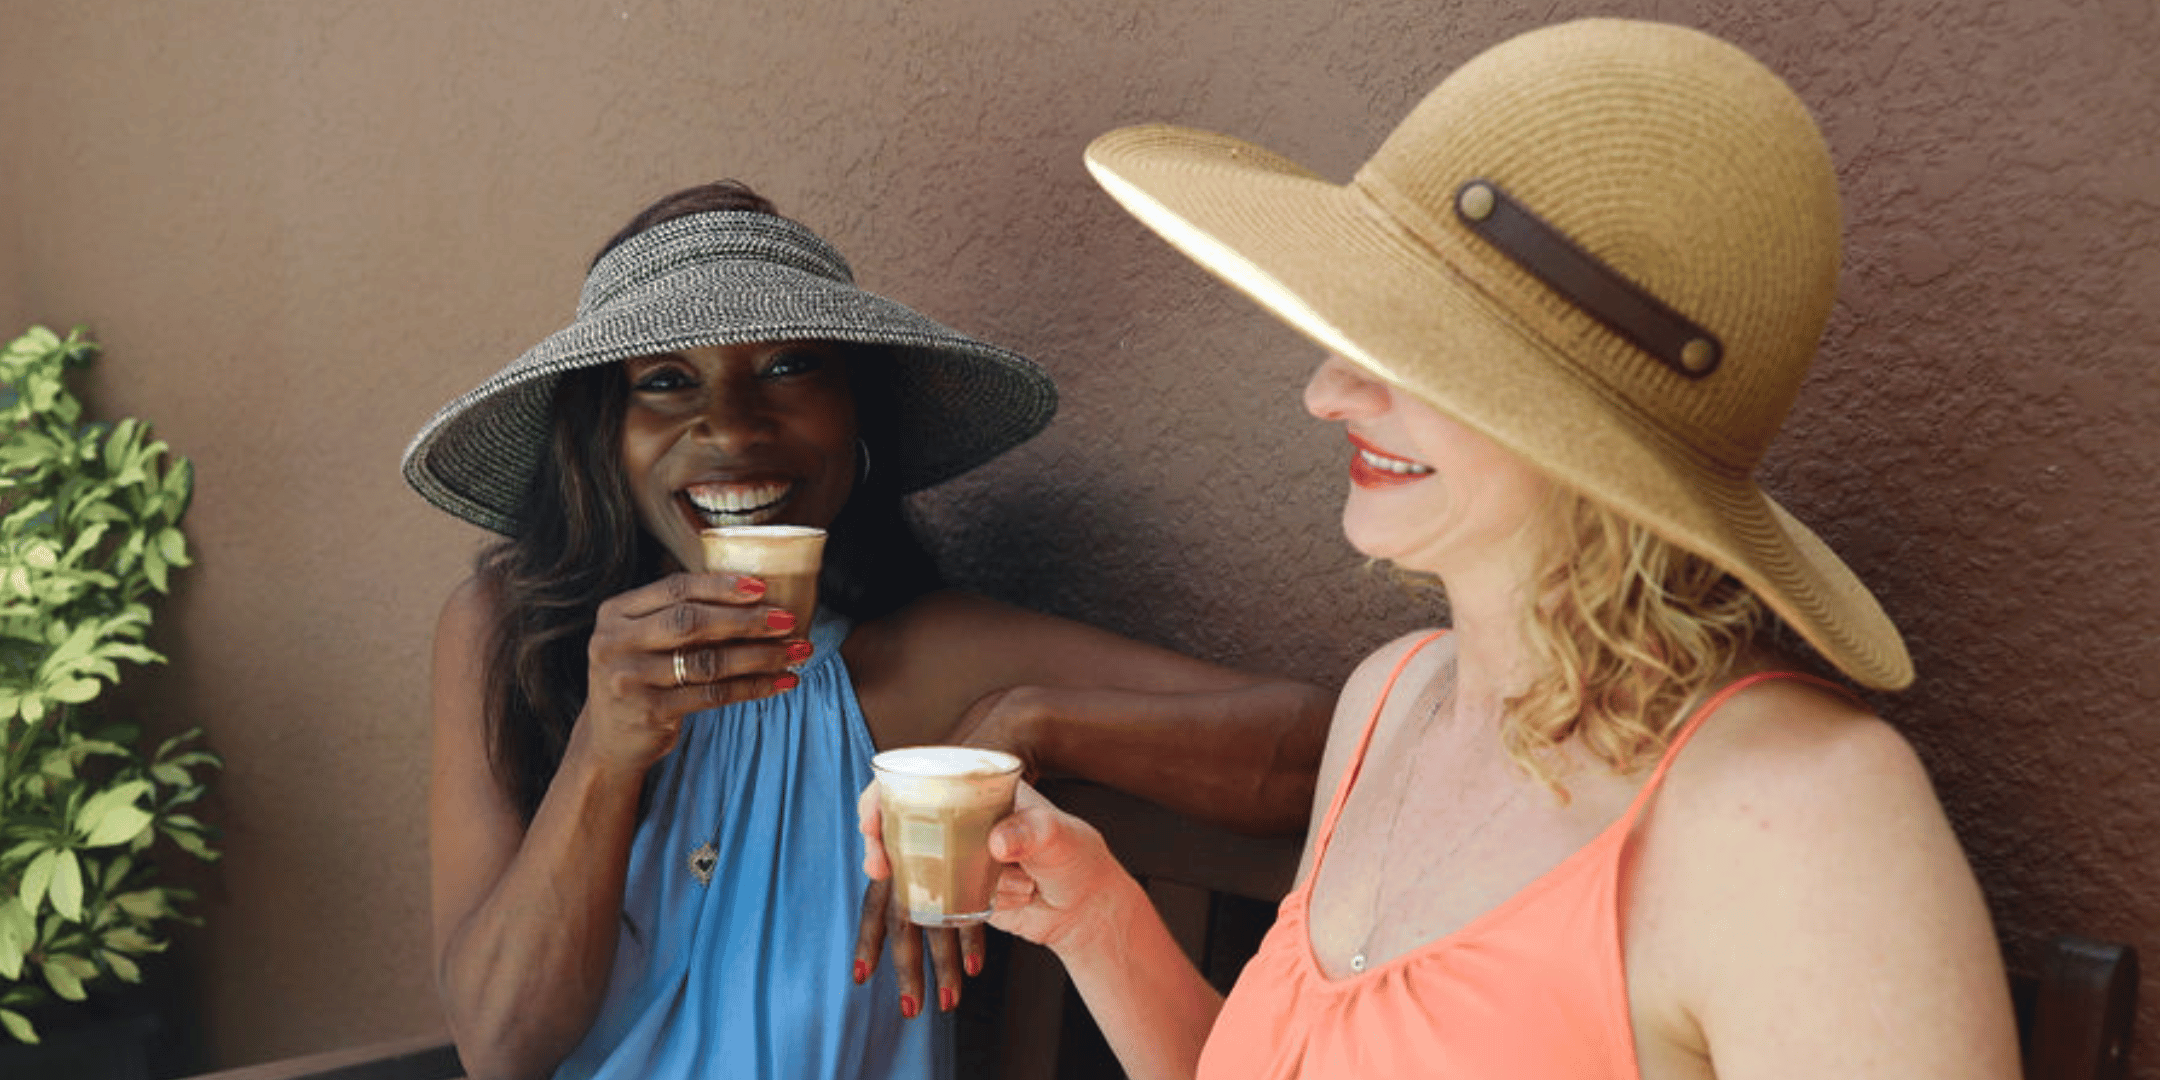 Melicent shares a naturally sweet drip coffee moment with her best friend 